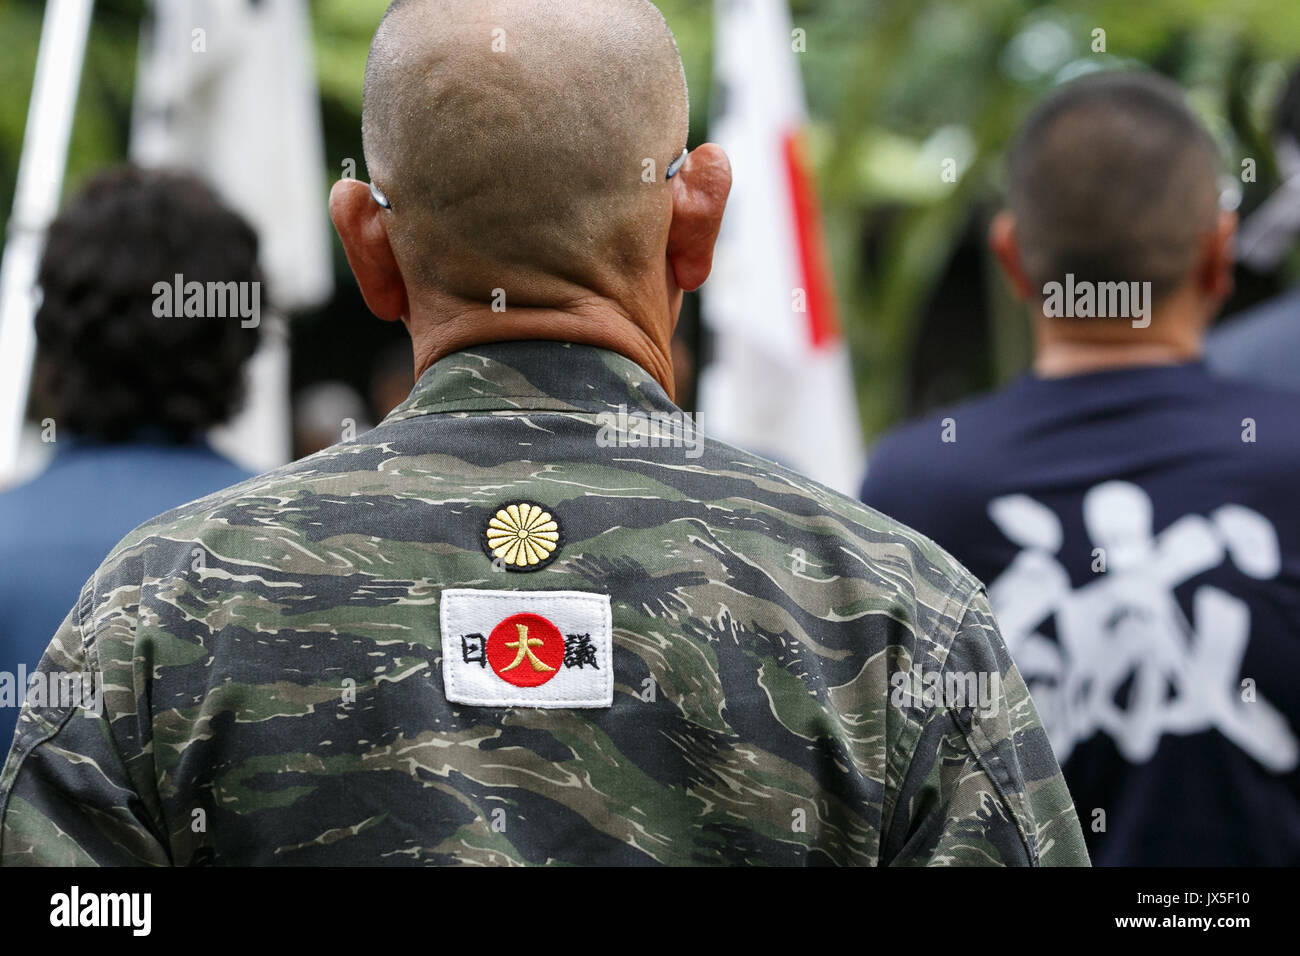 Tokyo, Japan. 15th Aug, 2017. Japanese nationalists dressed in military uniform visit Yasukuni Shrine to pay their respects to the war dead on the 72nd anniversary of Japan's surrender in World War II on August 15, 2017, Tokyo, Japan. Prime Minister Shinzo Abe was not among the lawmakers to visit the Shrine and instead sent a ritual offering to avoid angering neighboring countries who also associate Yasukuni with war criminals and Japan's imperial past. Credit: Rodrigo Reyes Marin/AFLO/Alamy Live News Stock Photo